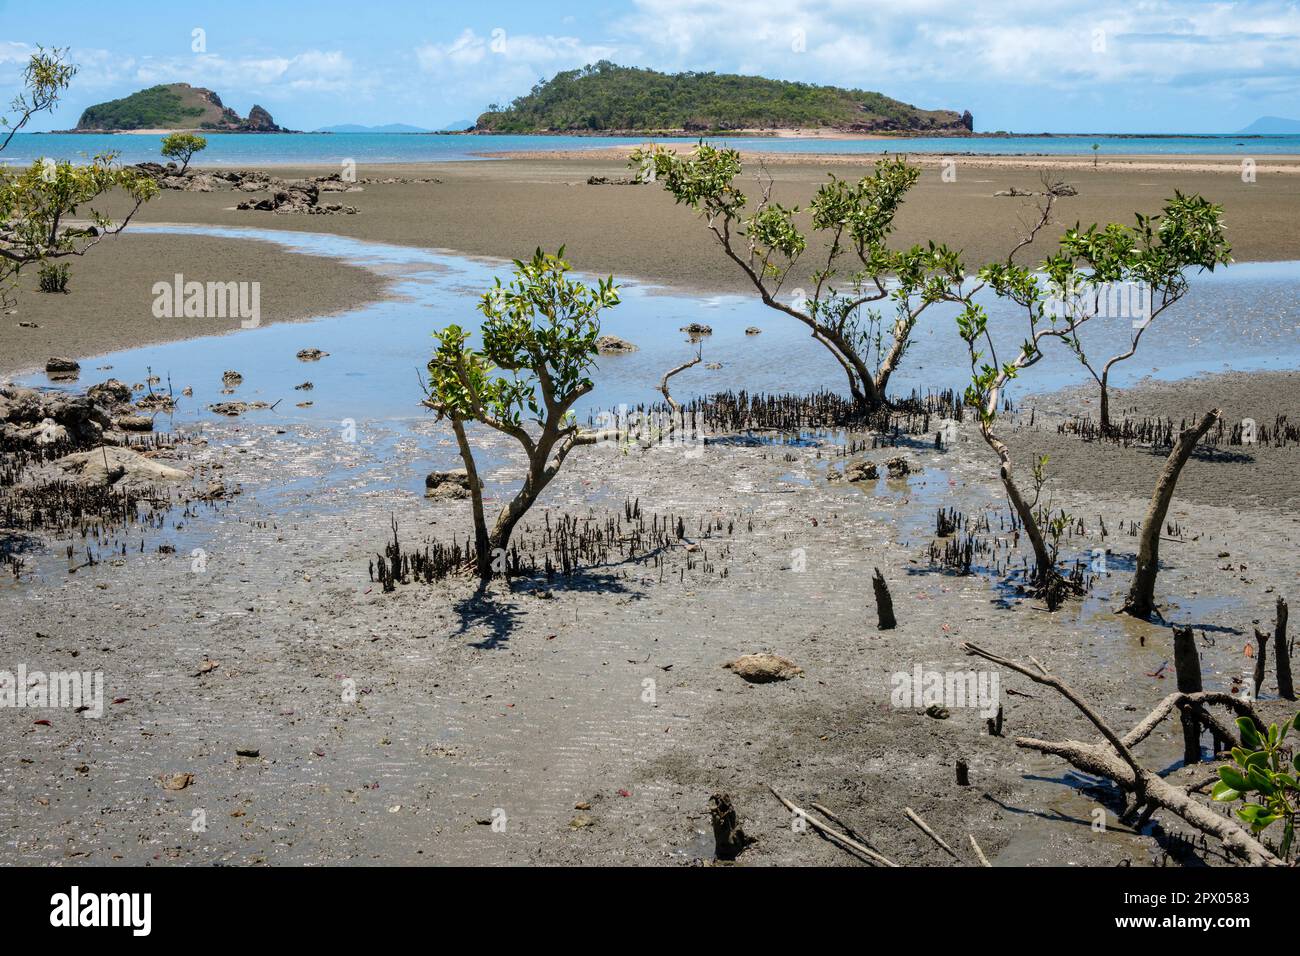 Mangroves on Seaforth Beach and view to South Red Cliff Island and Rocky Island, Queensland, Australia Stock Photo